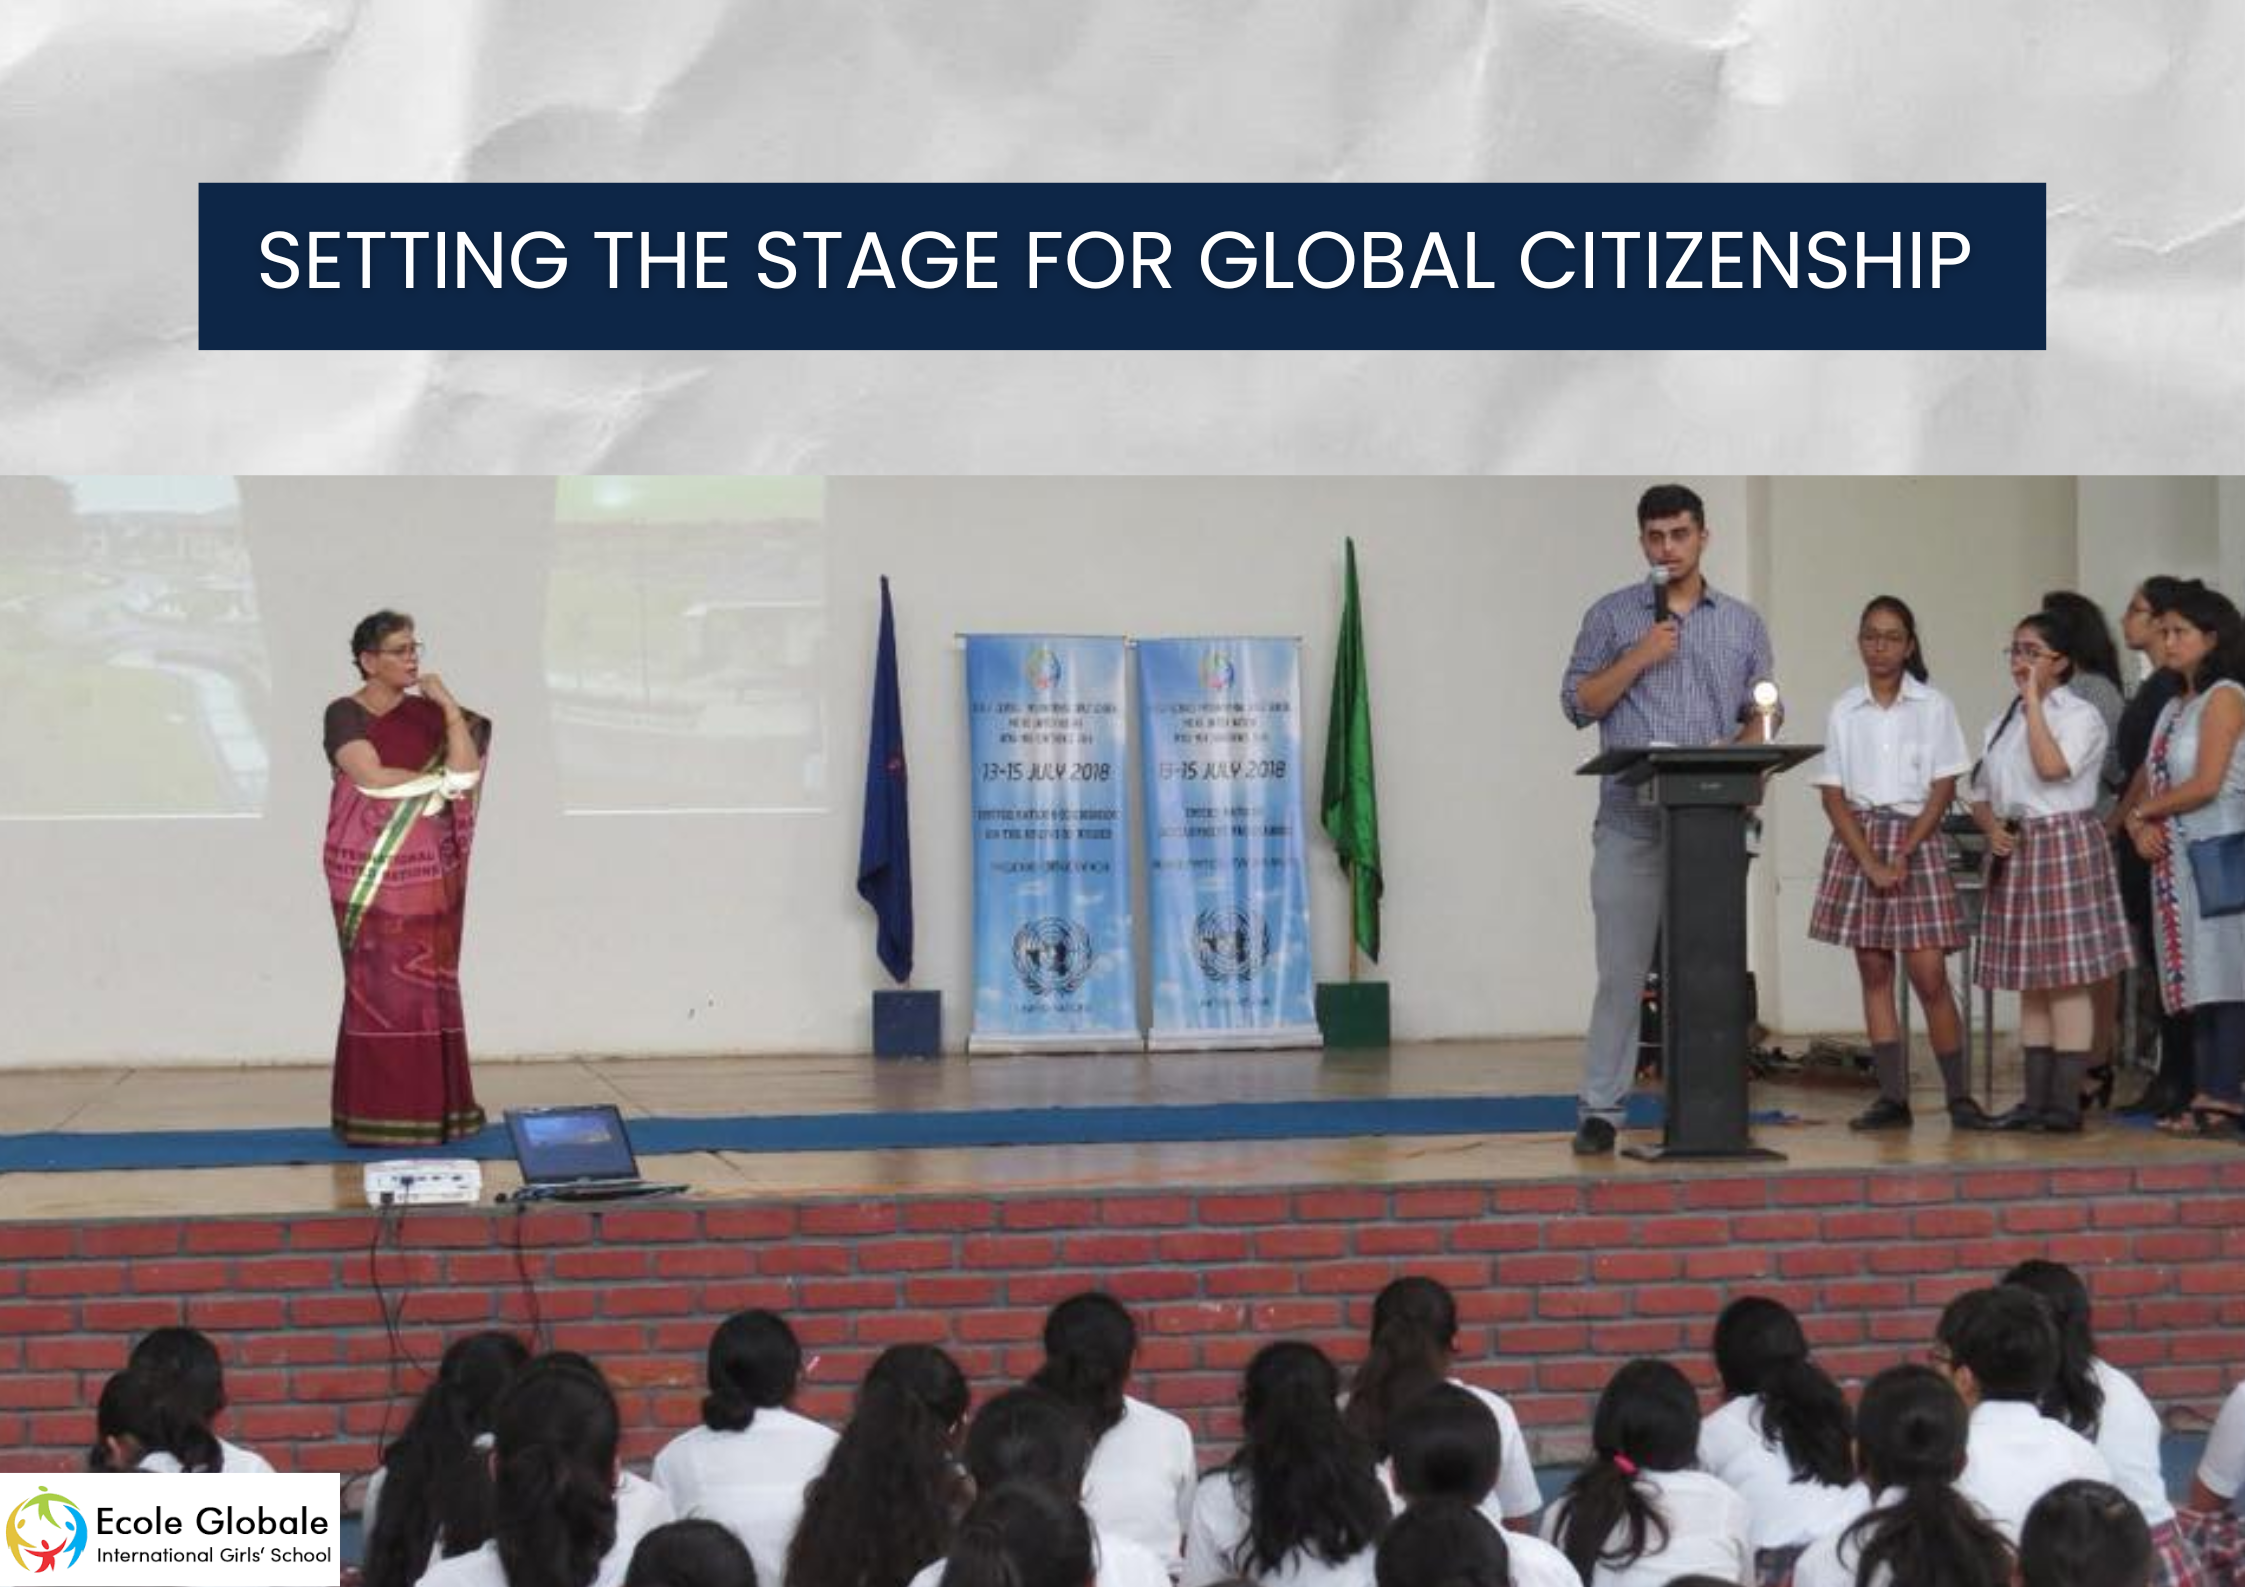 You are currently viewing Setting the Stage for Global Citizenship | Ecole Globale